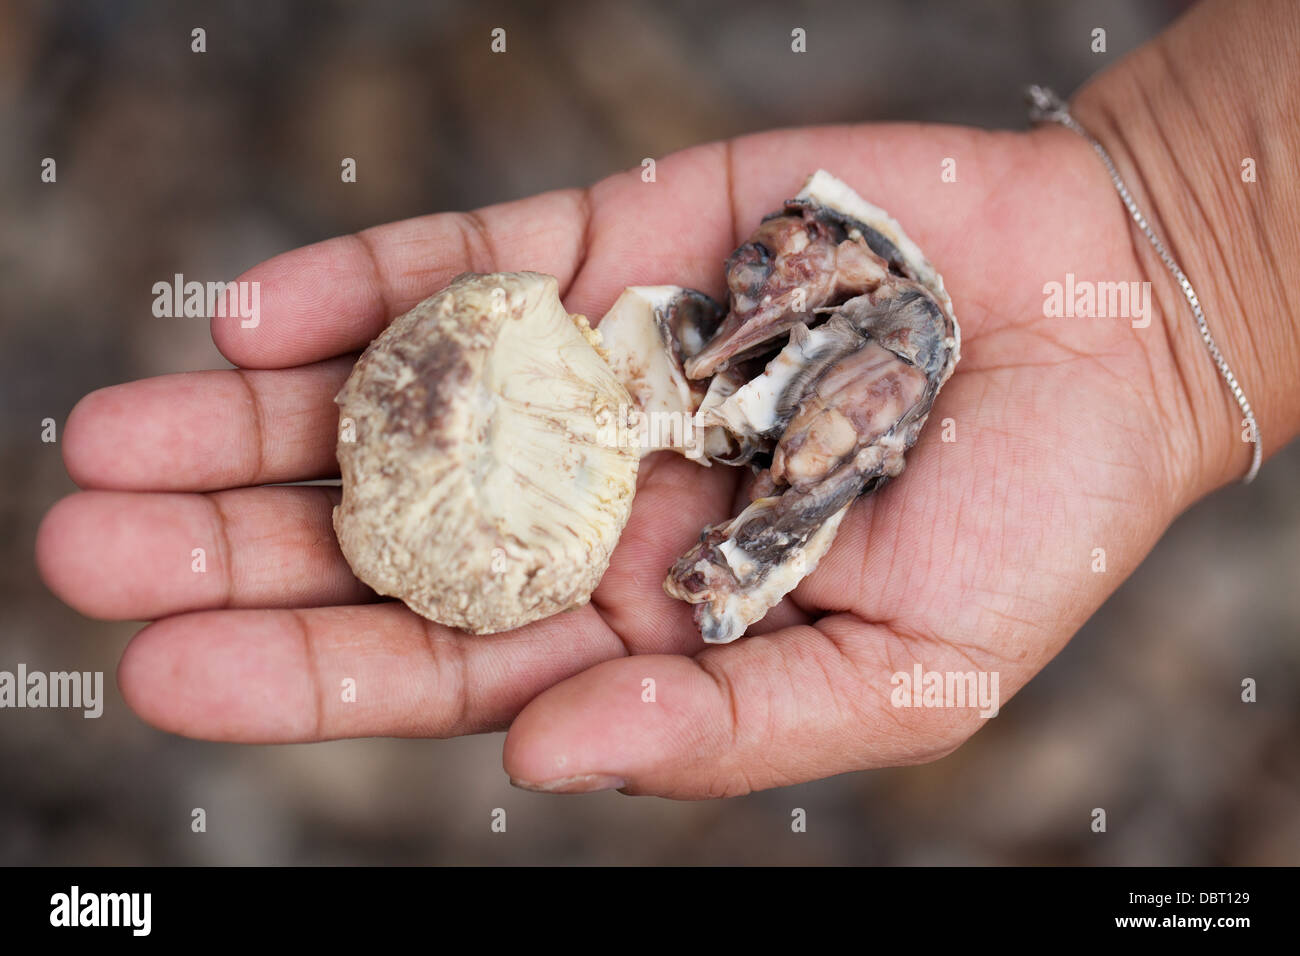 A Filipino holds a shelled balut, or fertilized duck egg, exposing the embryo inside in Oriental Mindoro, Philippines. Stock Photo